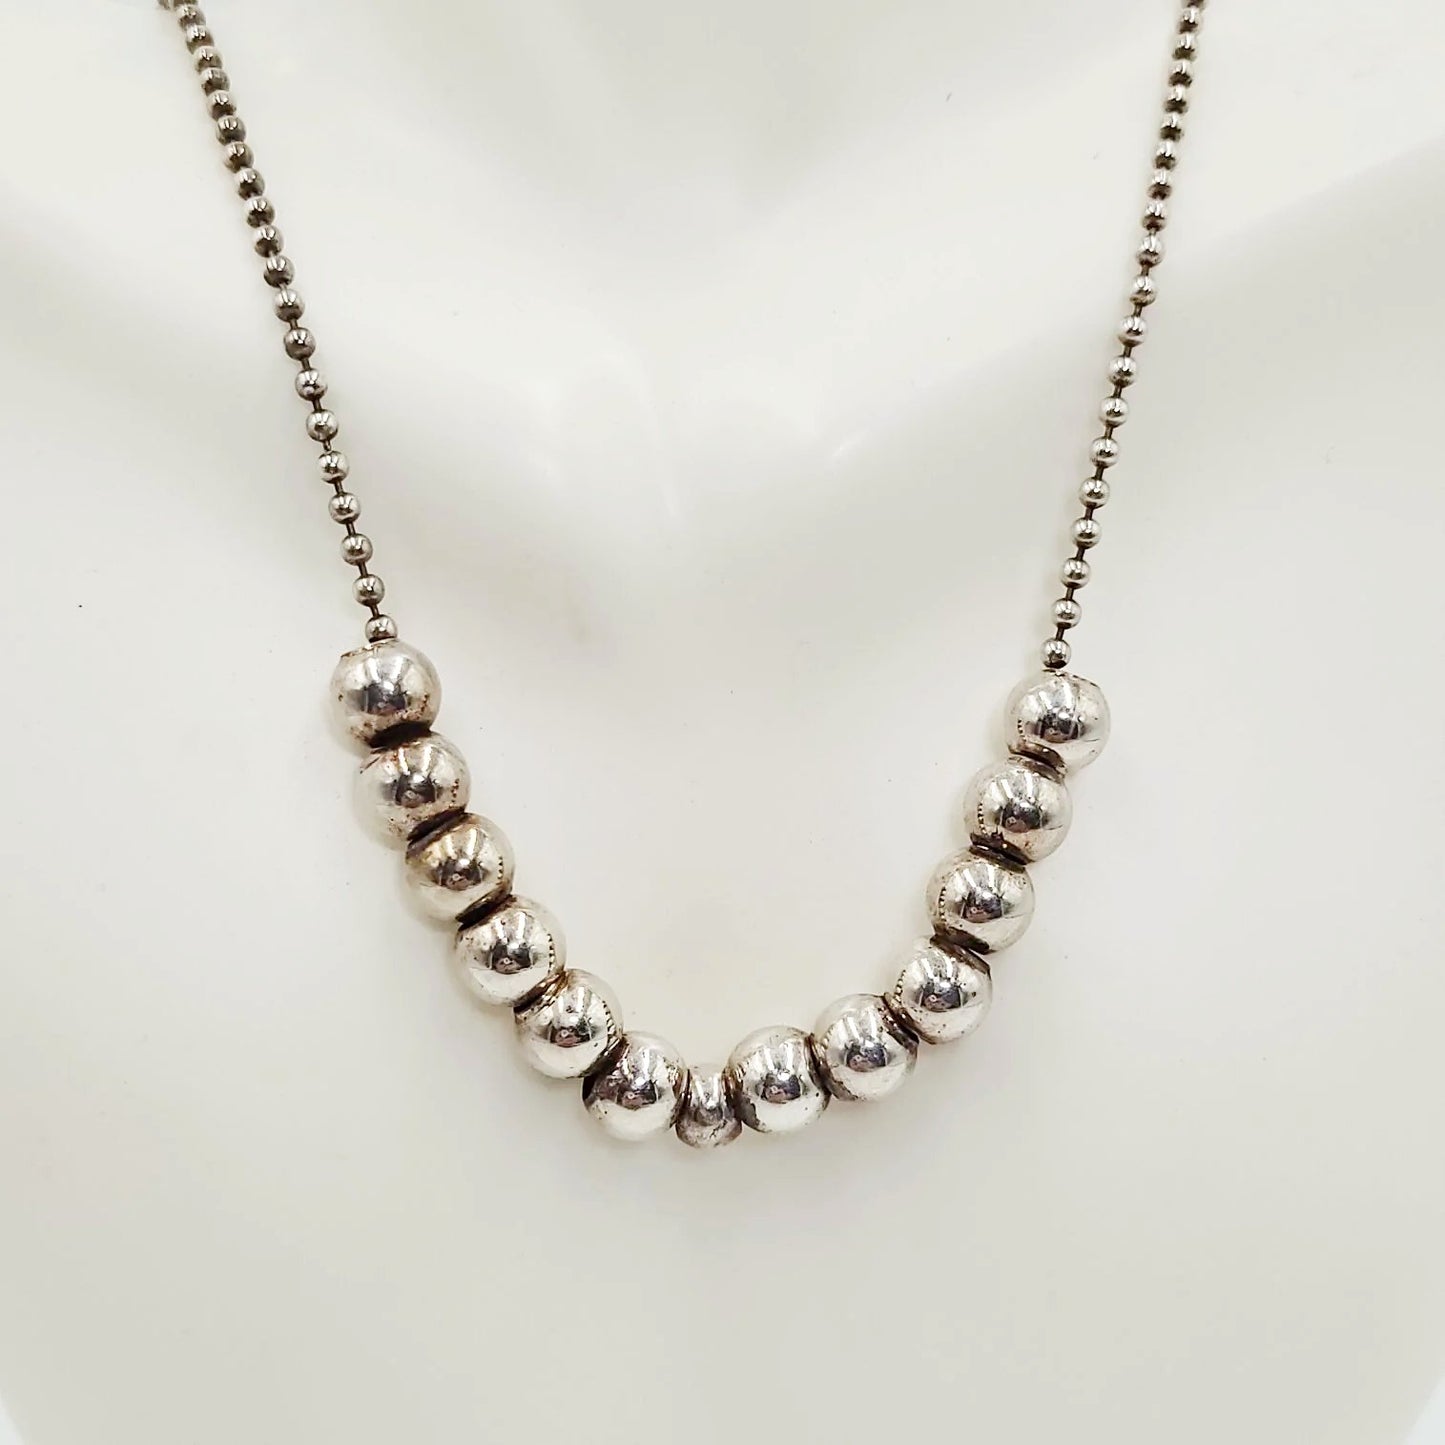 Silver Bead Chain 24" Necklace Sterling Silver "Pearls" 925 - Elevated Metaphysical